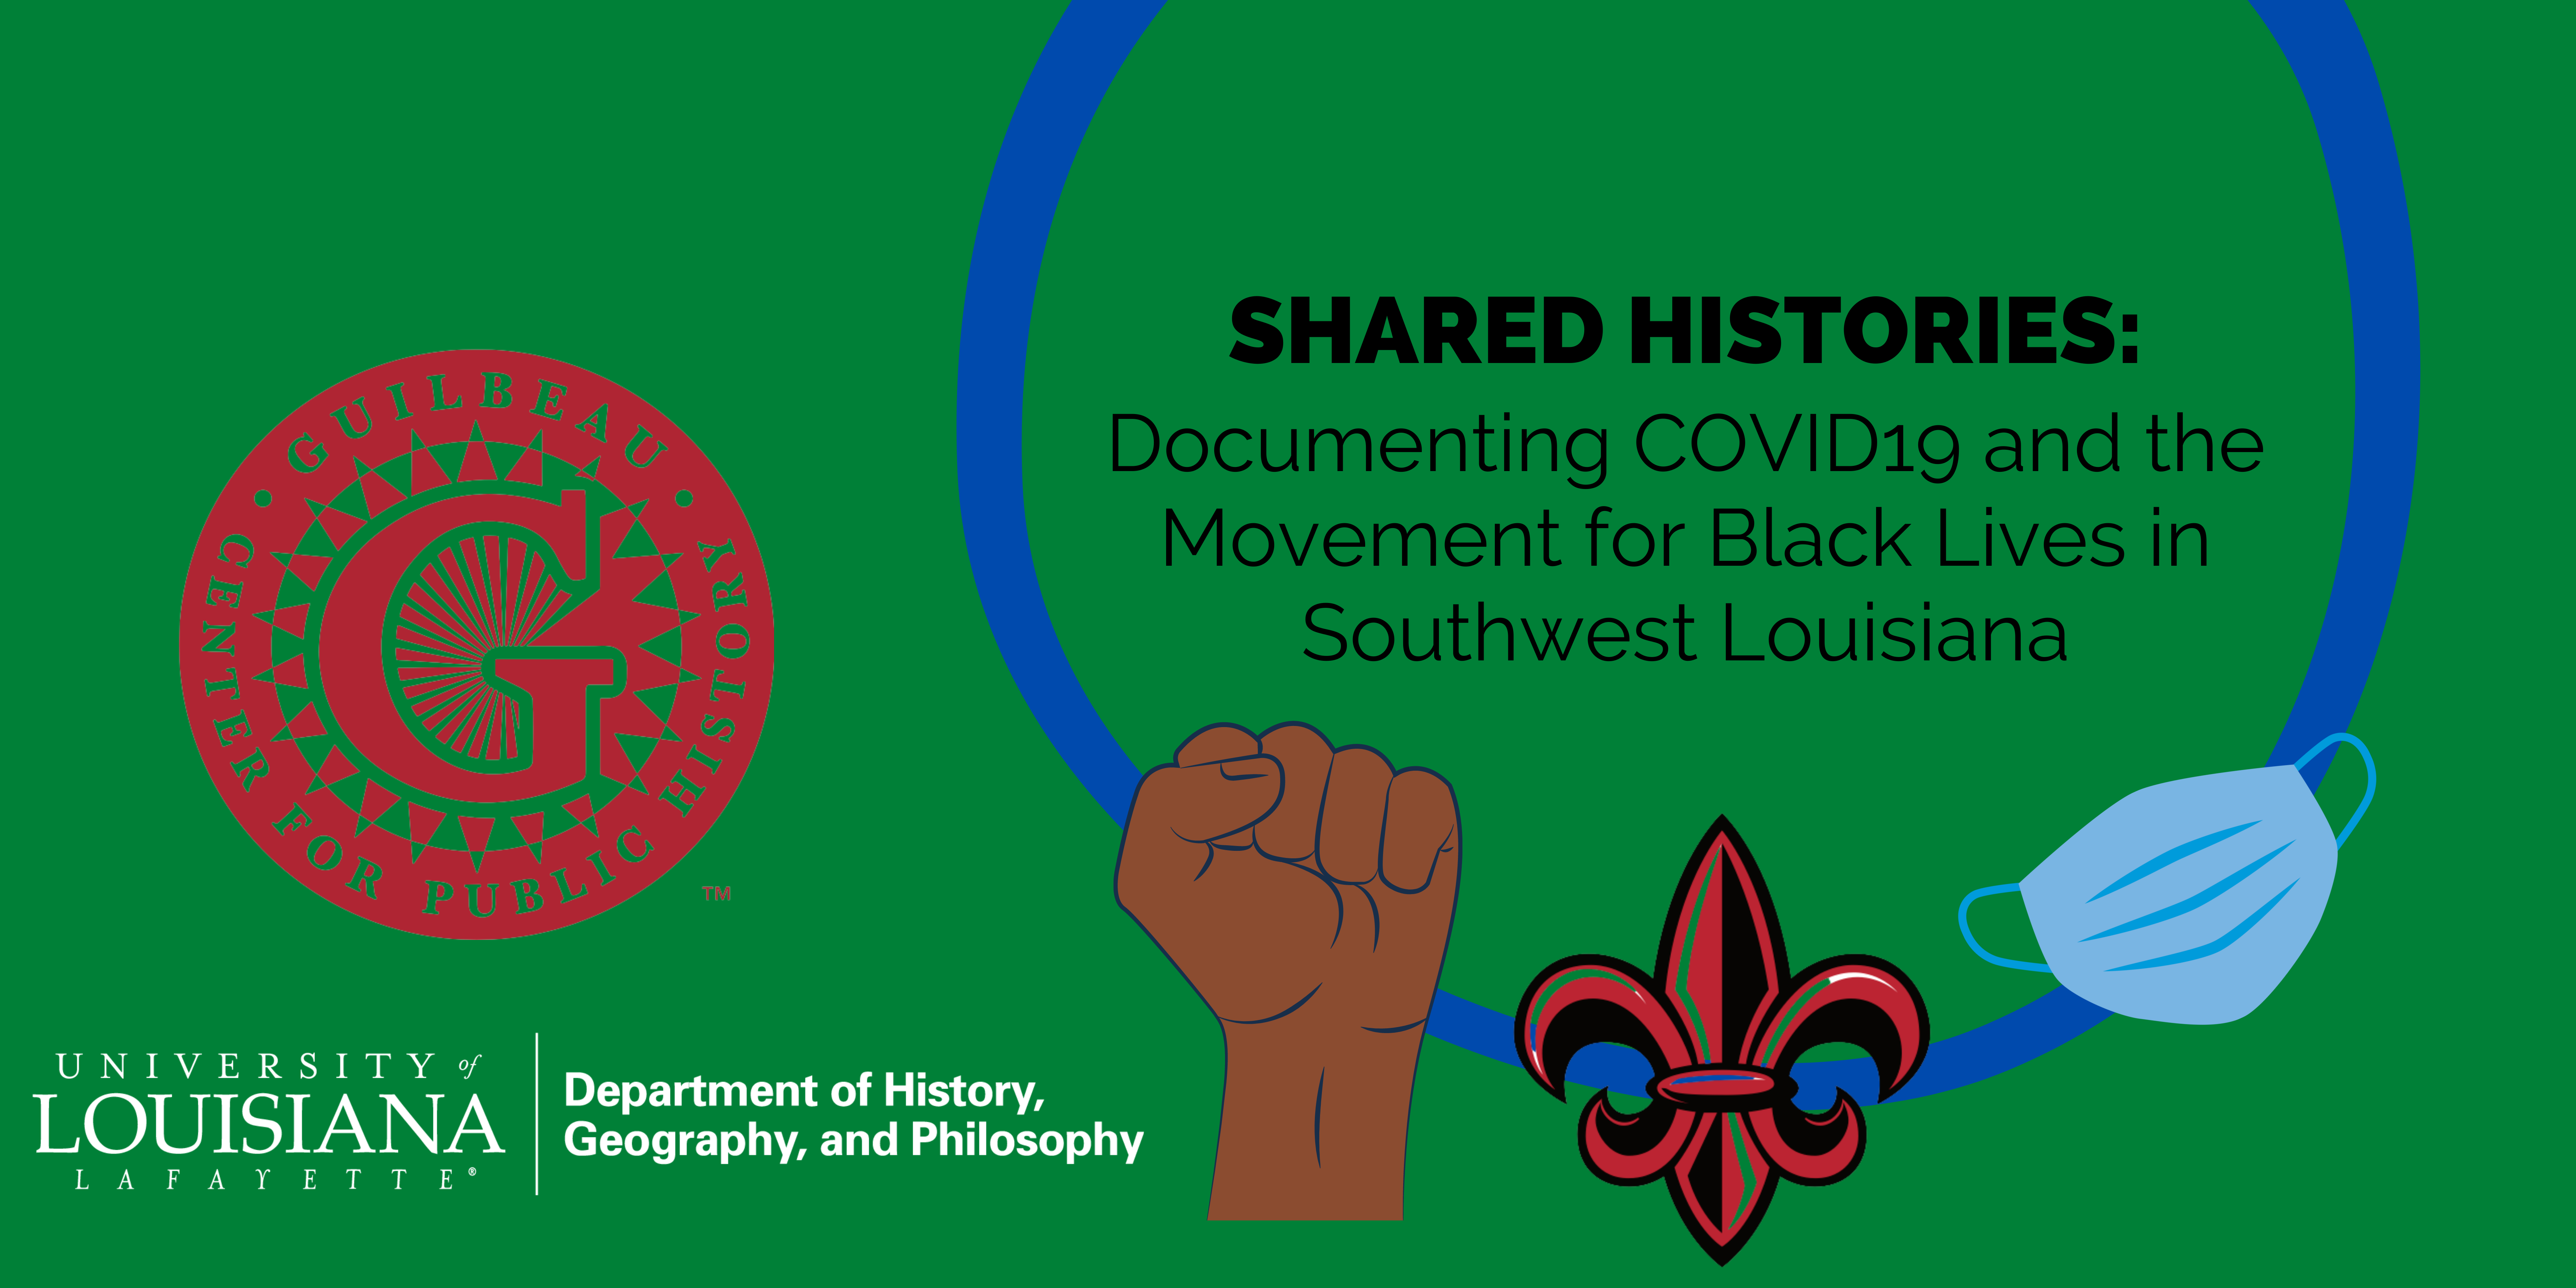 Shared Histories: Documenting Covid-19 and the Movement for Black Lives in Southwest Louisiana